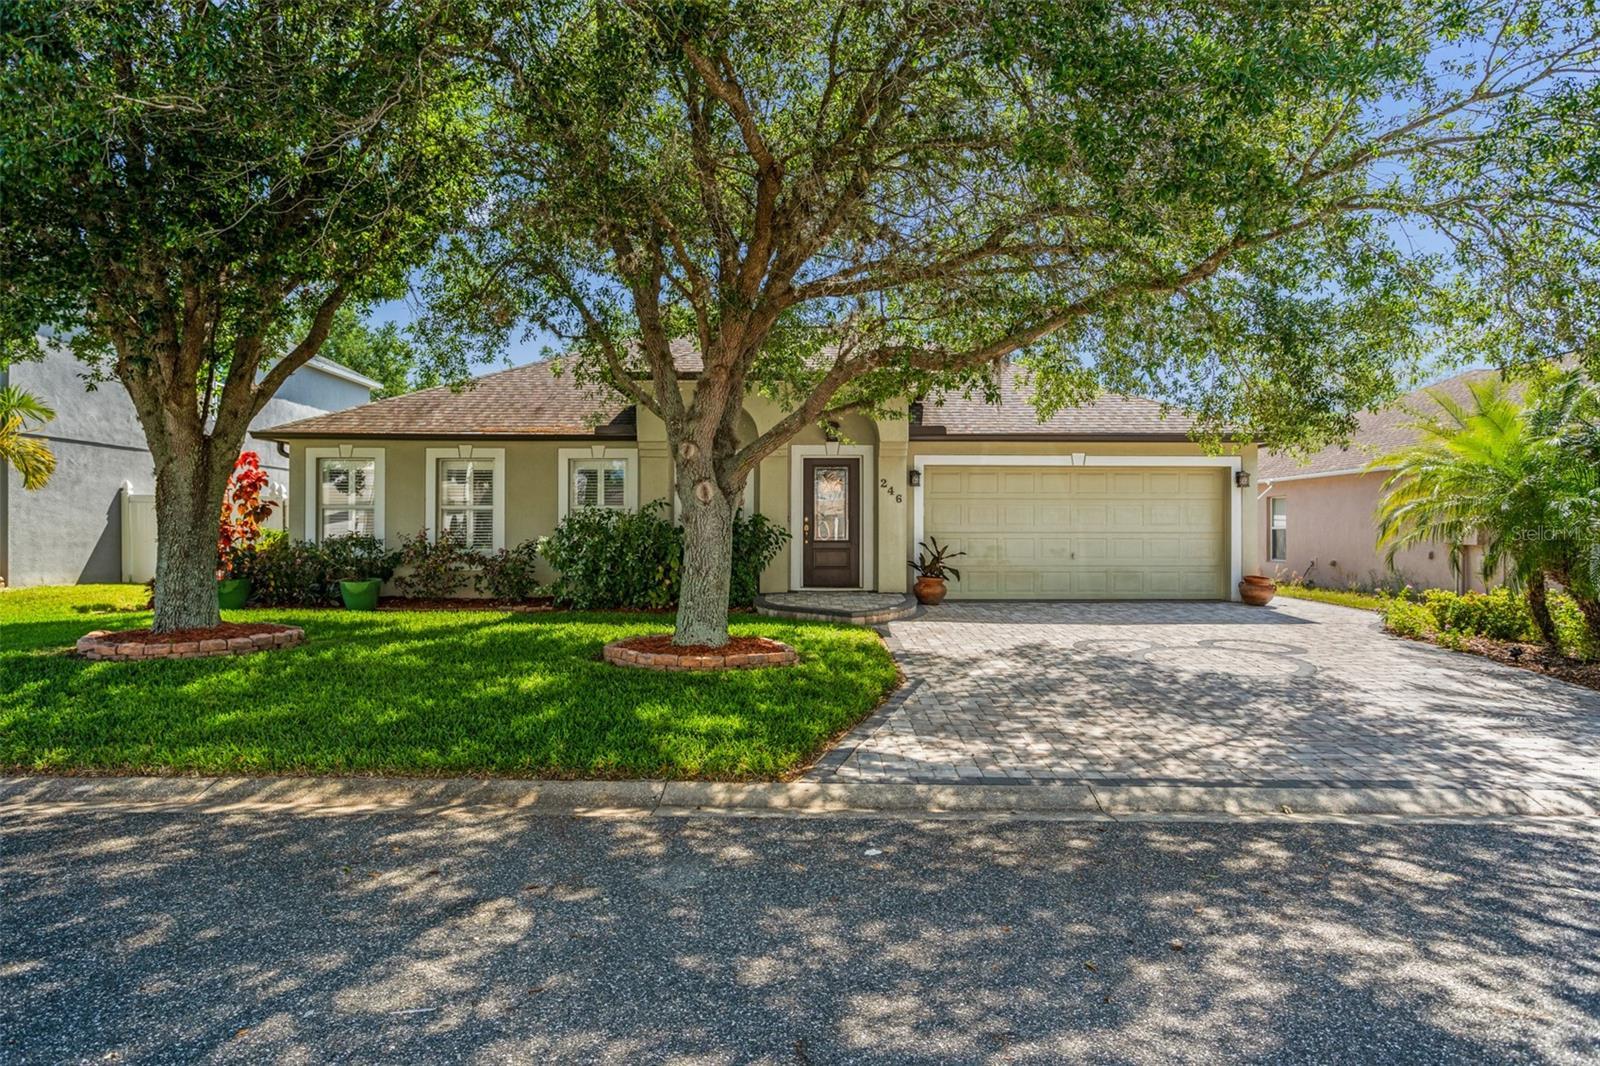 Photo one of 246 Vervain Ave Davenport FL 33837 | MLS O6197379